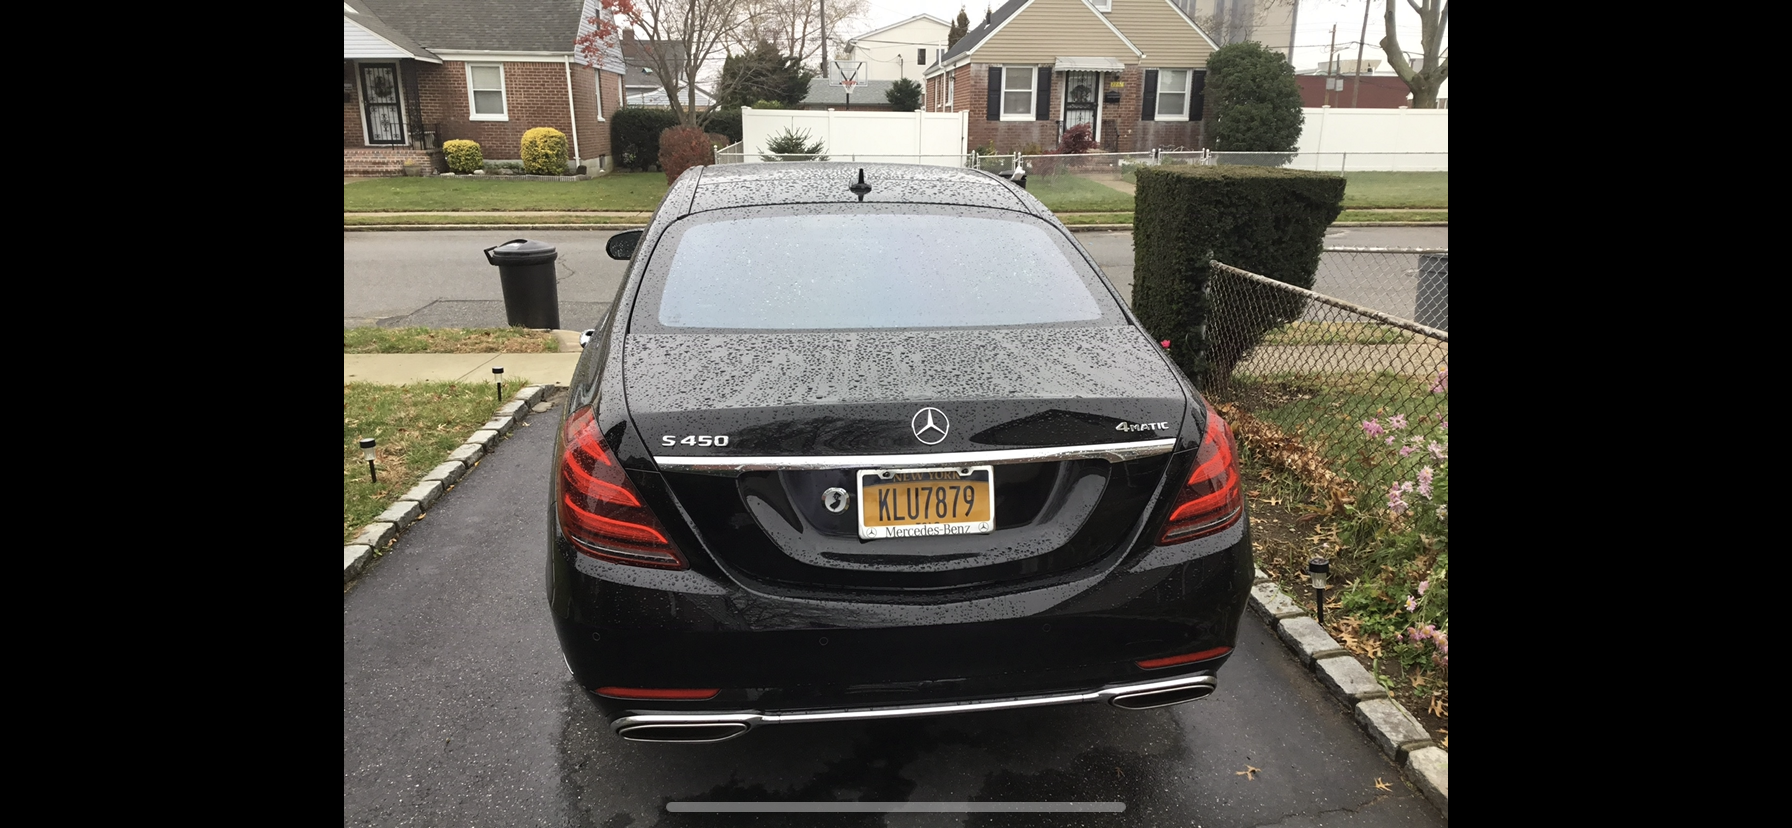 MERCEDES S550
Sedan /
Morristown, NJ 07960

 / Hourly $0.00
 / Hourly (Other services) $85.00
 / Airport Transfer $175.00
